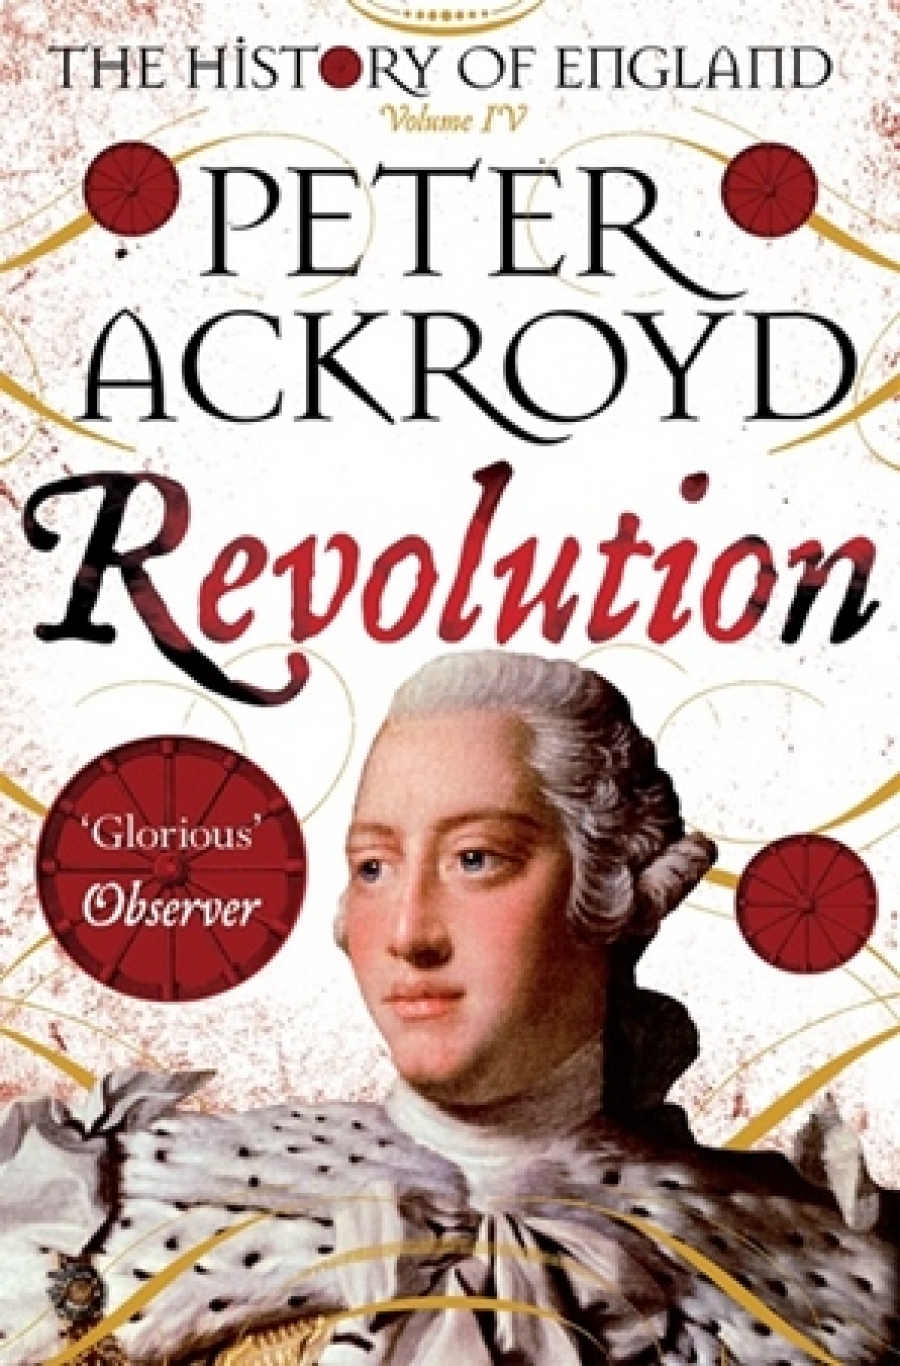 Ackroyd Peter Revolution: A History of England Volume IV (The History of England) 